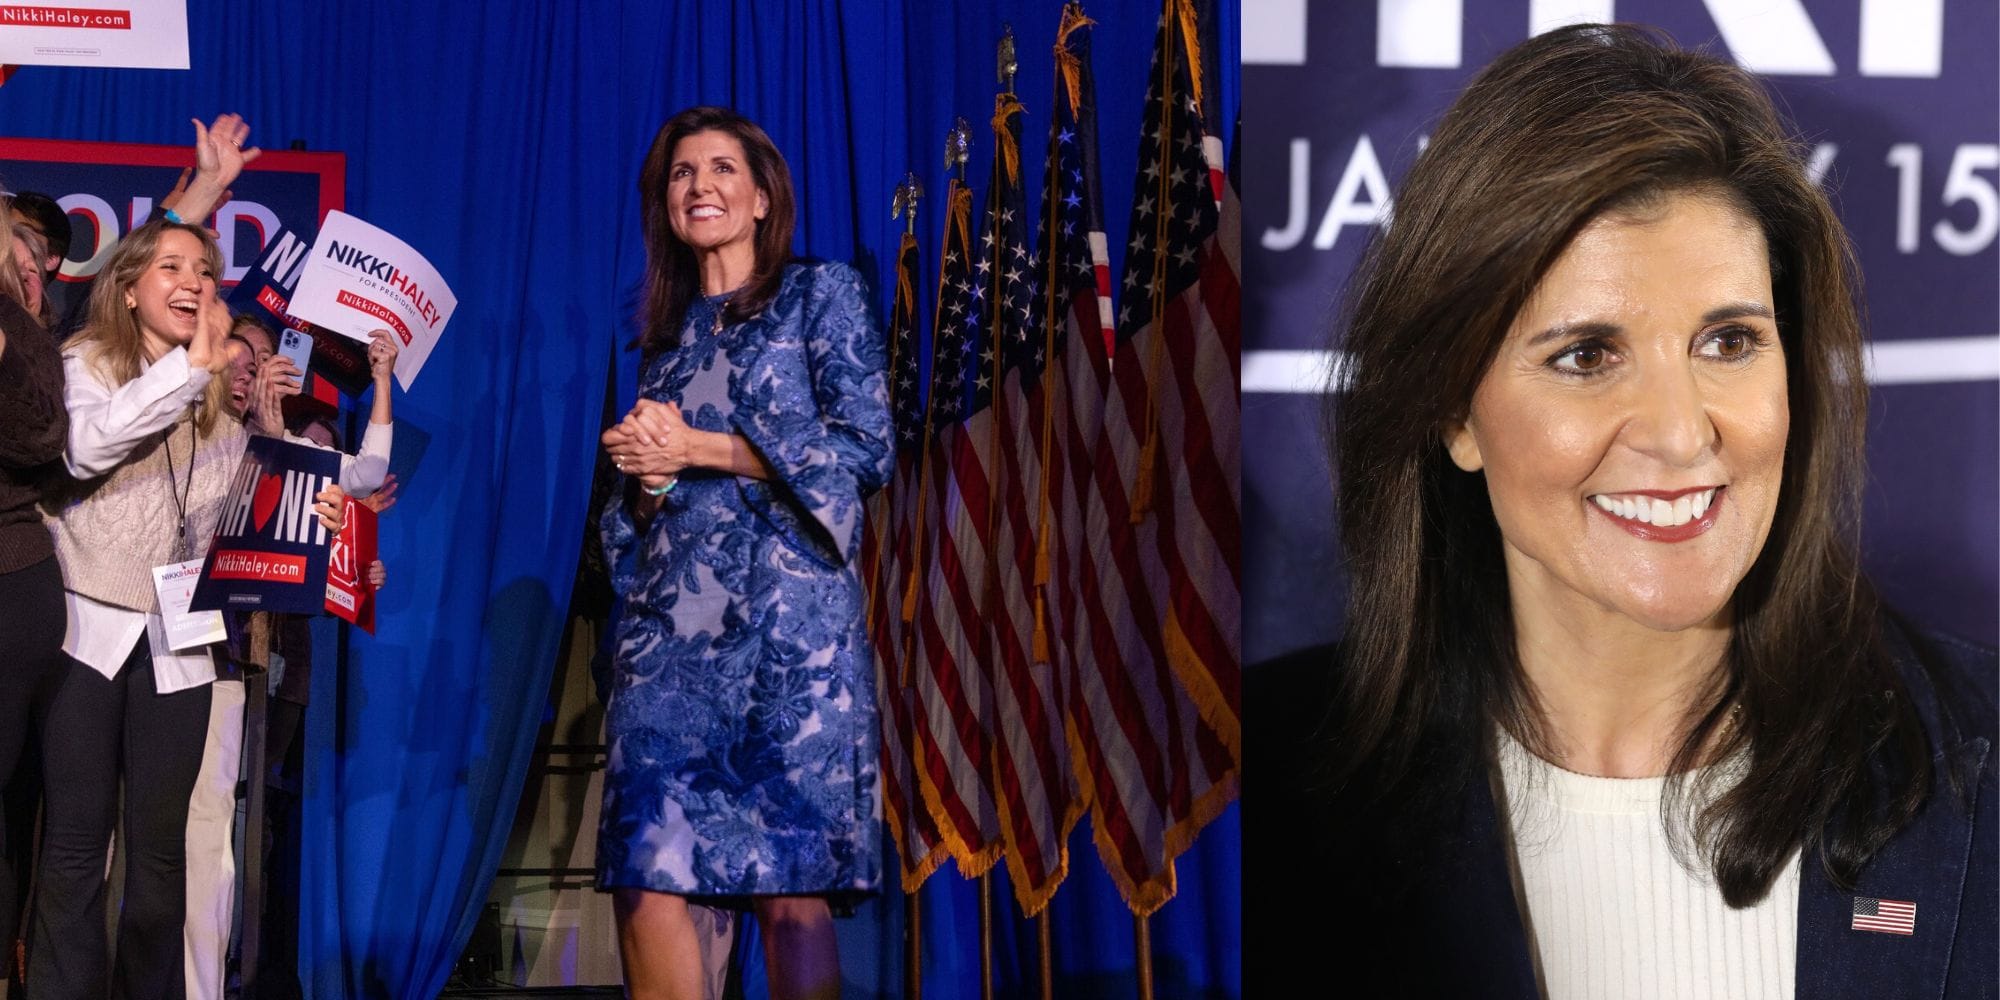 Nikki Haley Affair: Is it True She Had a Secret Connection with People in the Past?